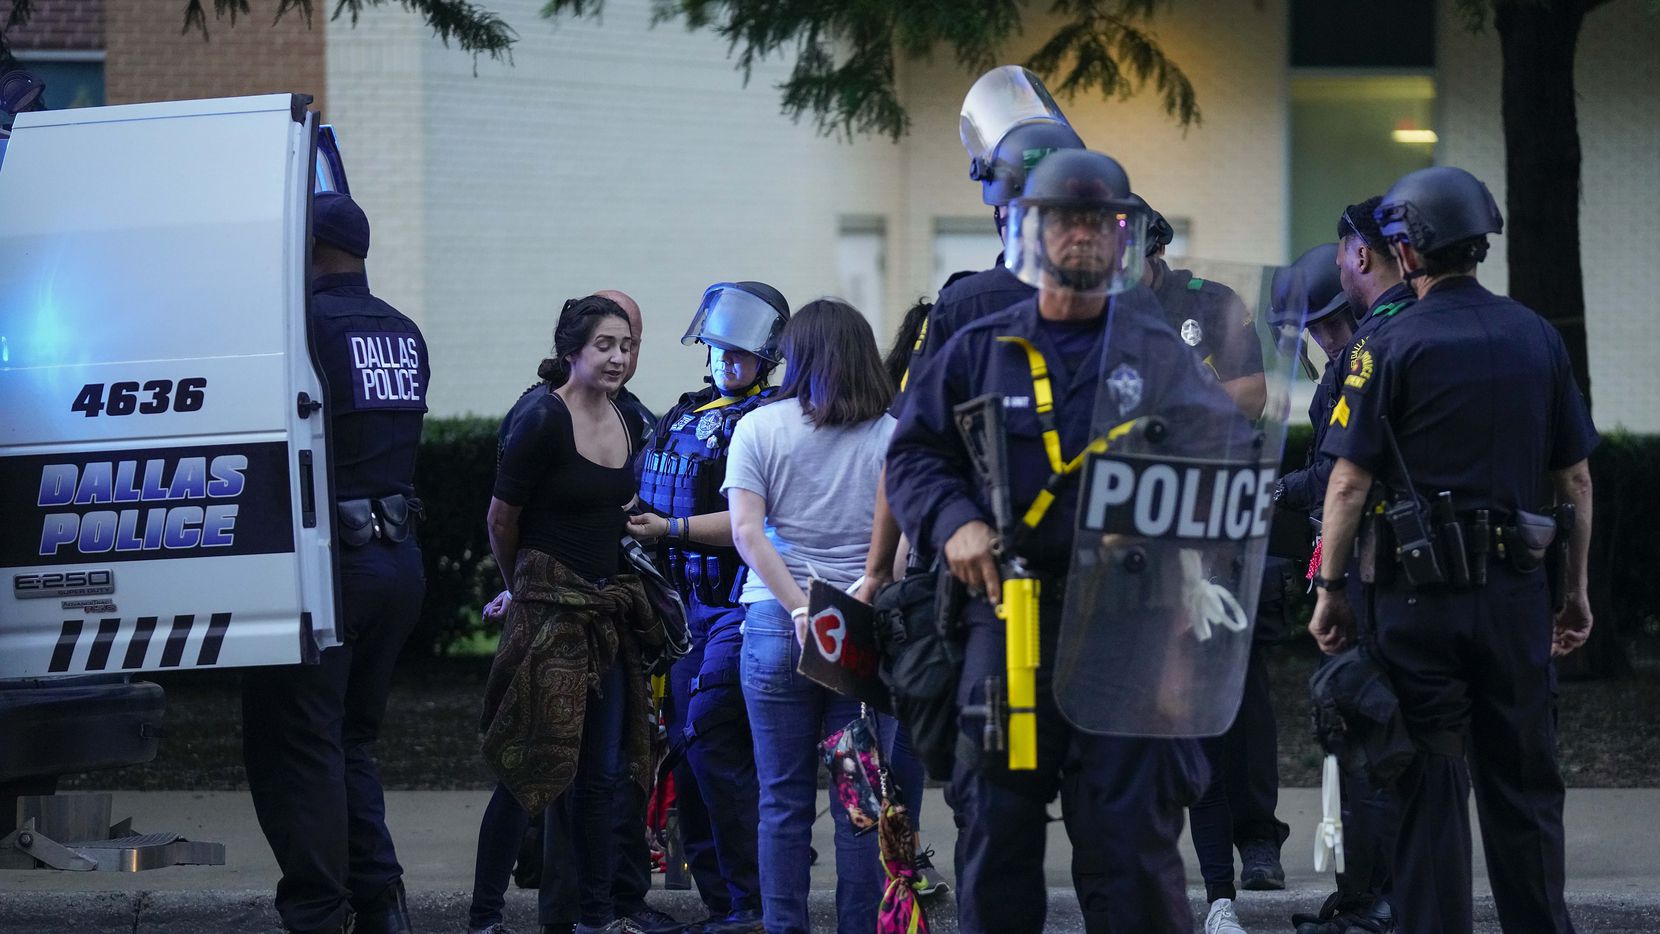 A group of people, some carrying protest signs, are arrested for curfew violations outside...